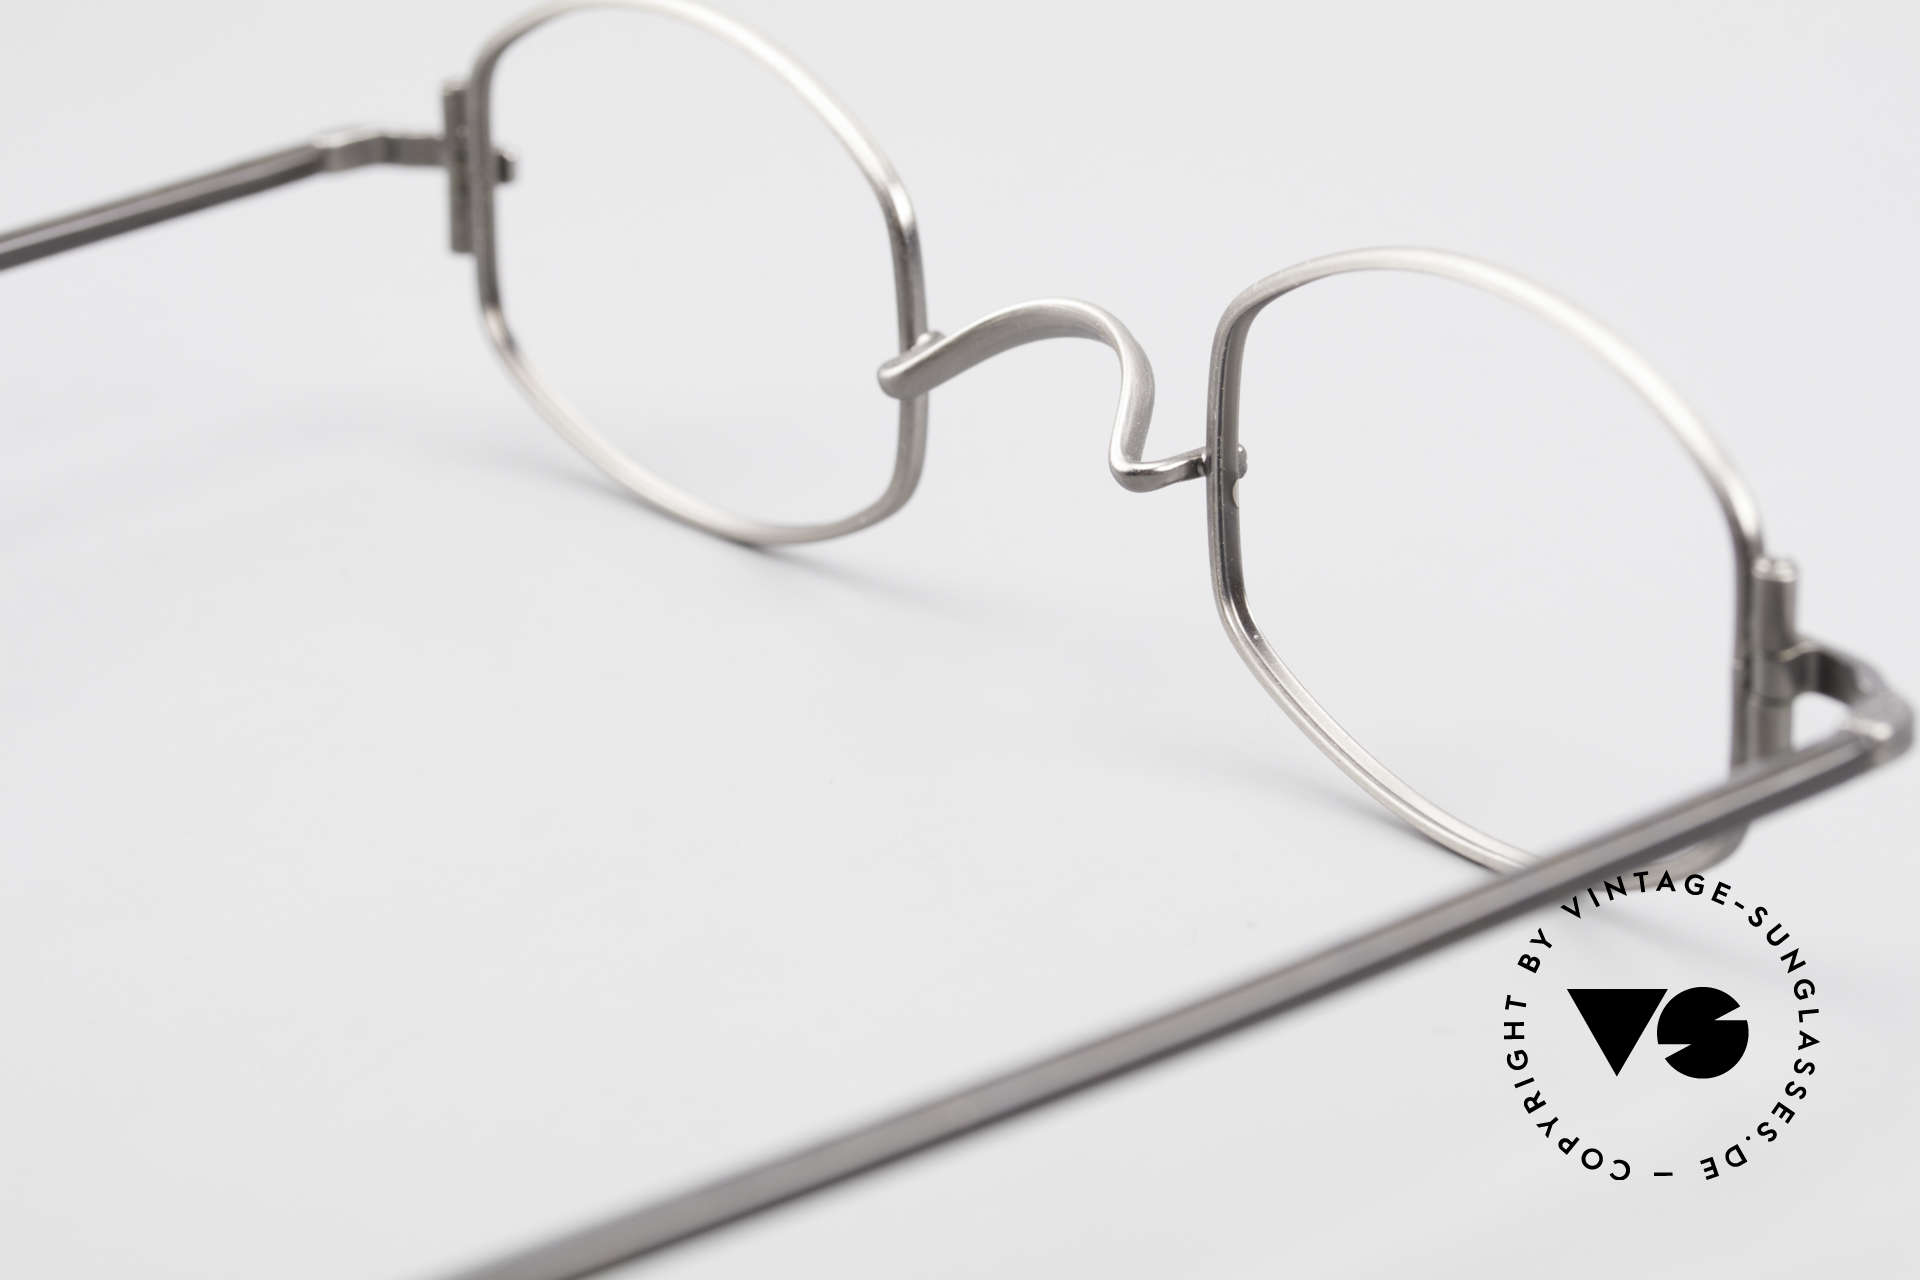 Lunor XA 03 Extraordinary Eyeglass Design, the frame front / frame design looks like a "LYING TON", Made for Men and Women